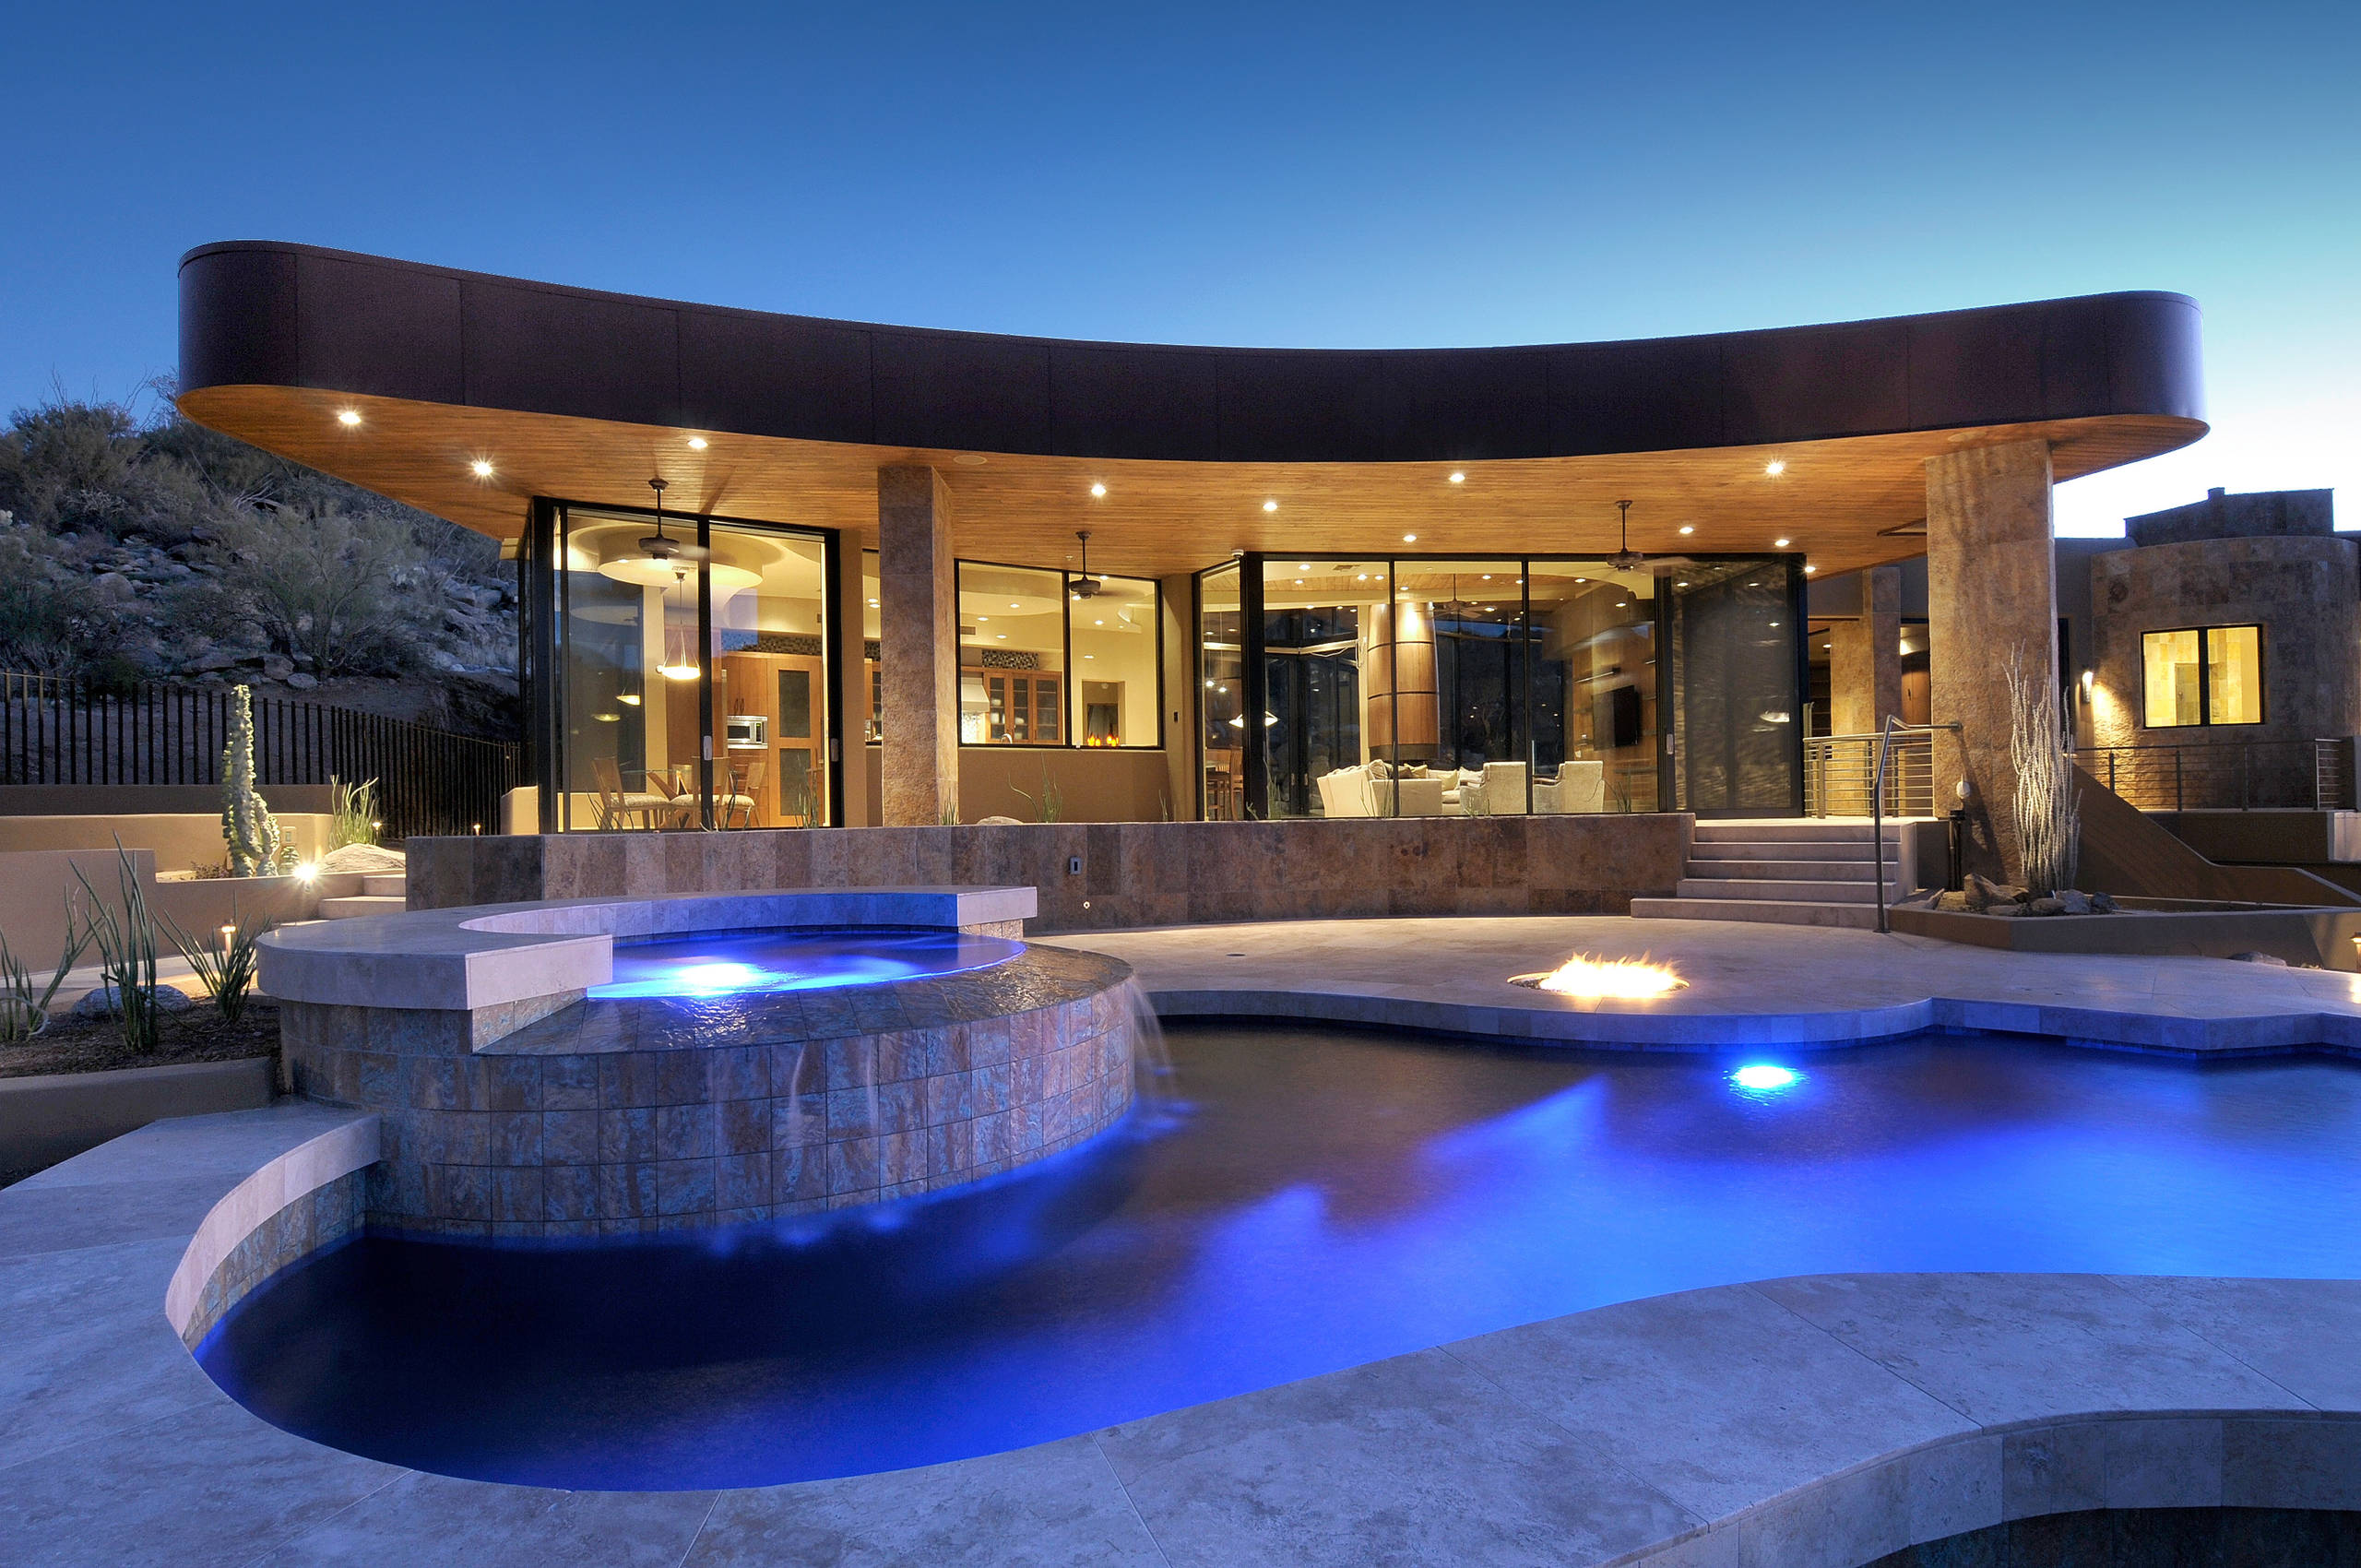 Over 2,600+ Awe-Inspiring Custom Swimming Pool Ideas For Your Outdoor Space